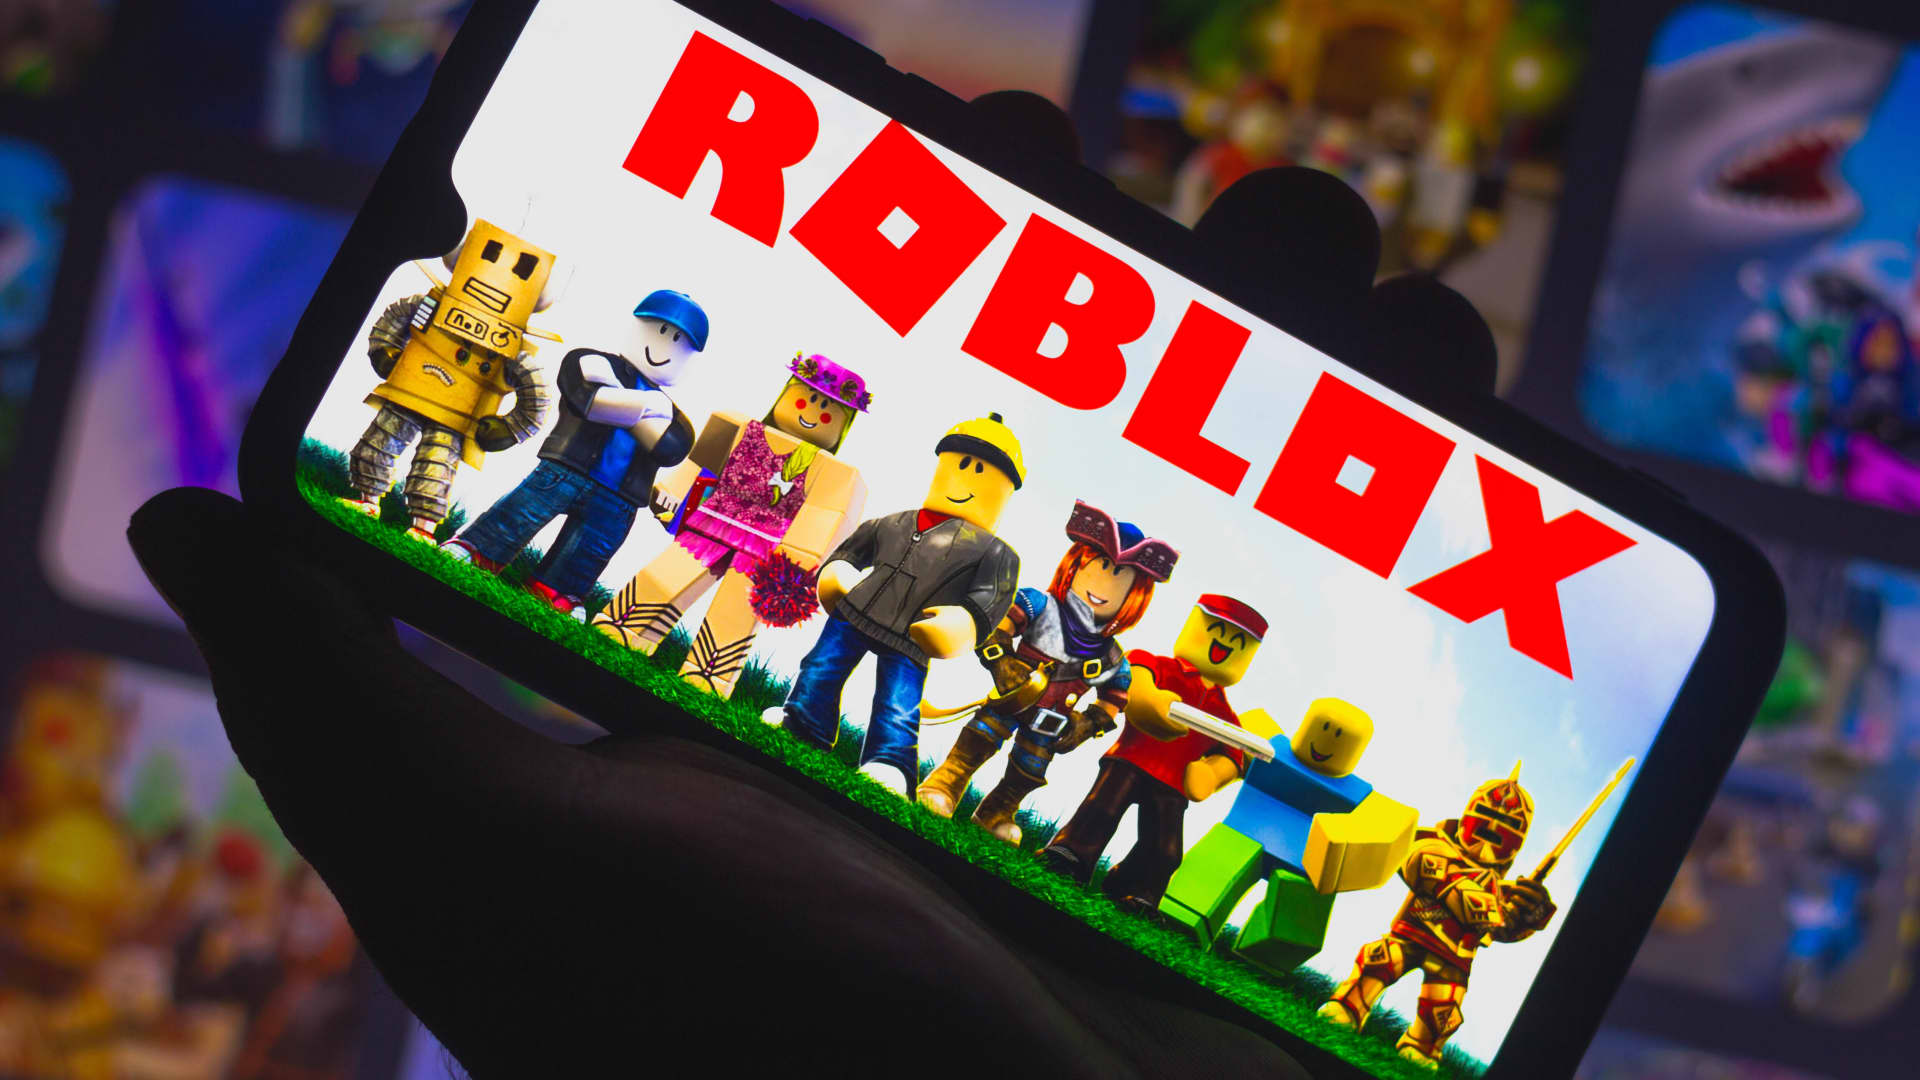 Shares of Roblox pop 17% after company's third-quarter results beat estimates